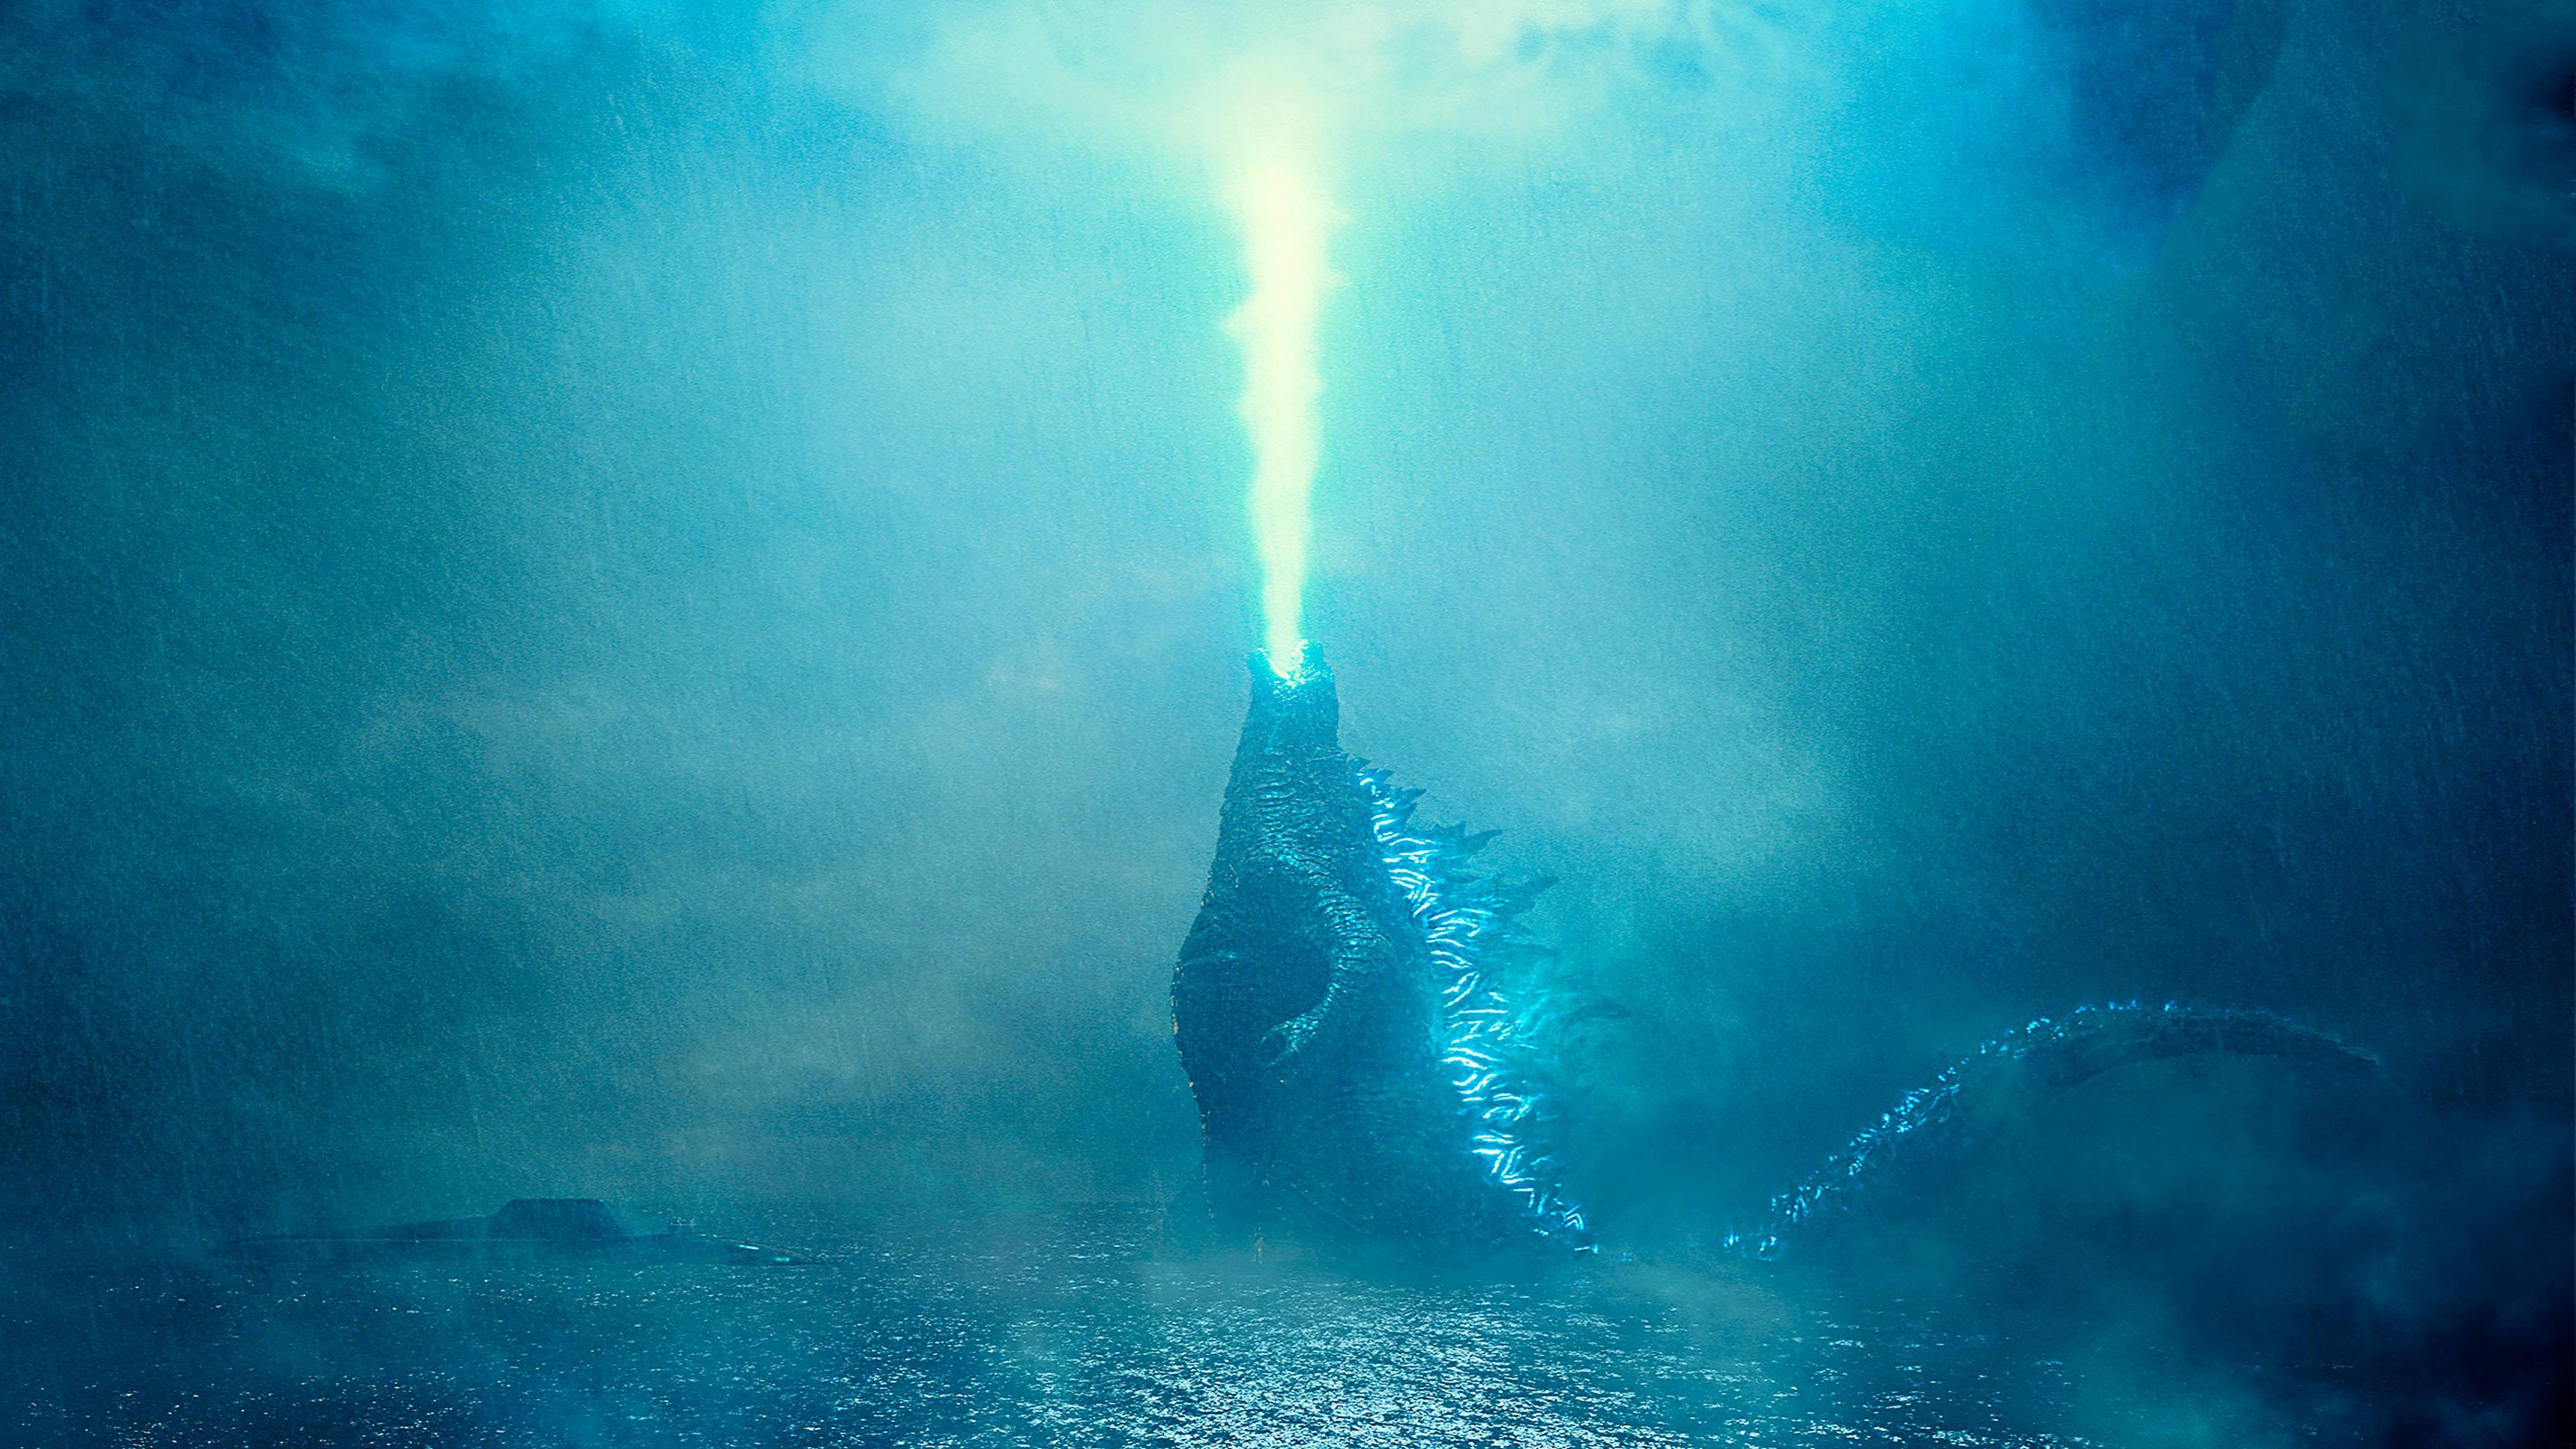 200 Godzilla 4K Wallpapers For Mobile and Desktop